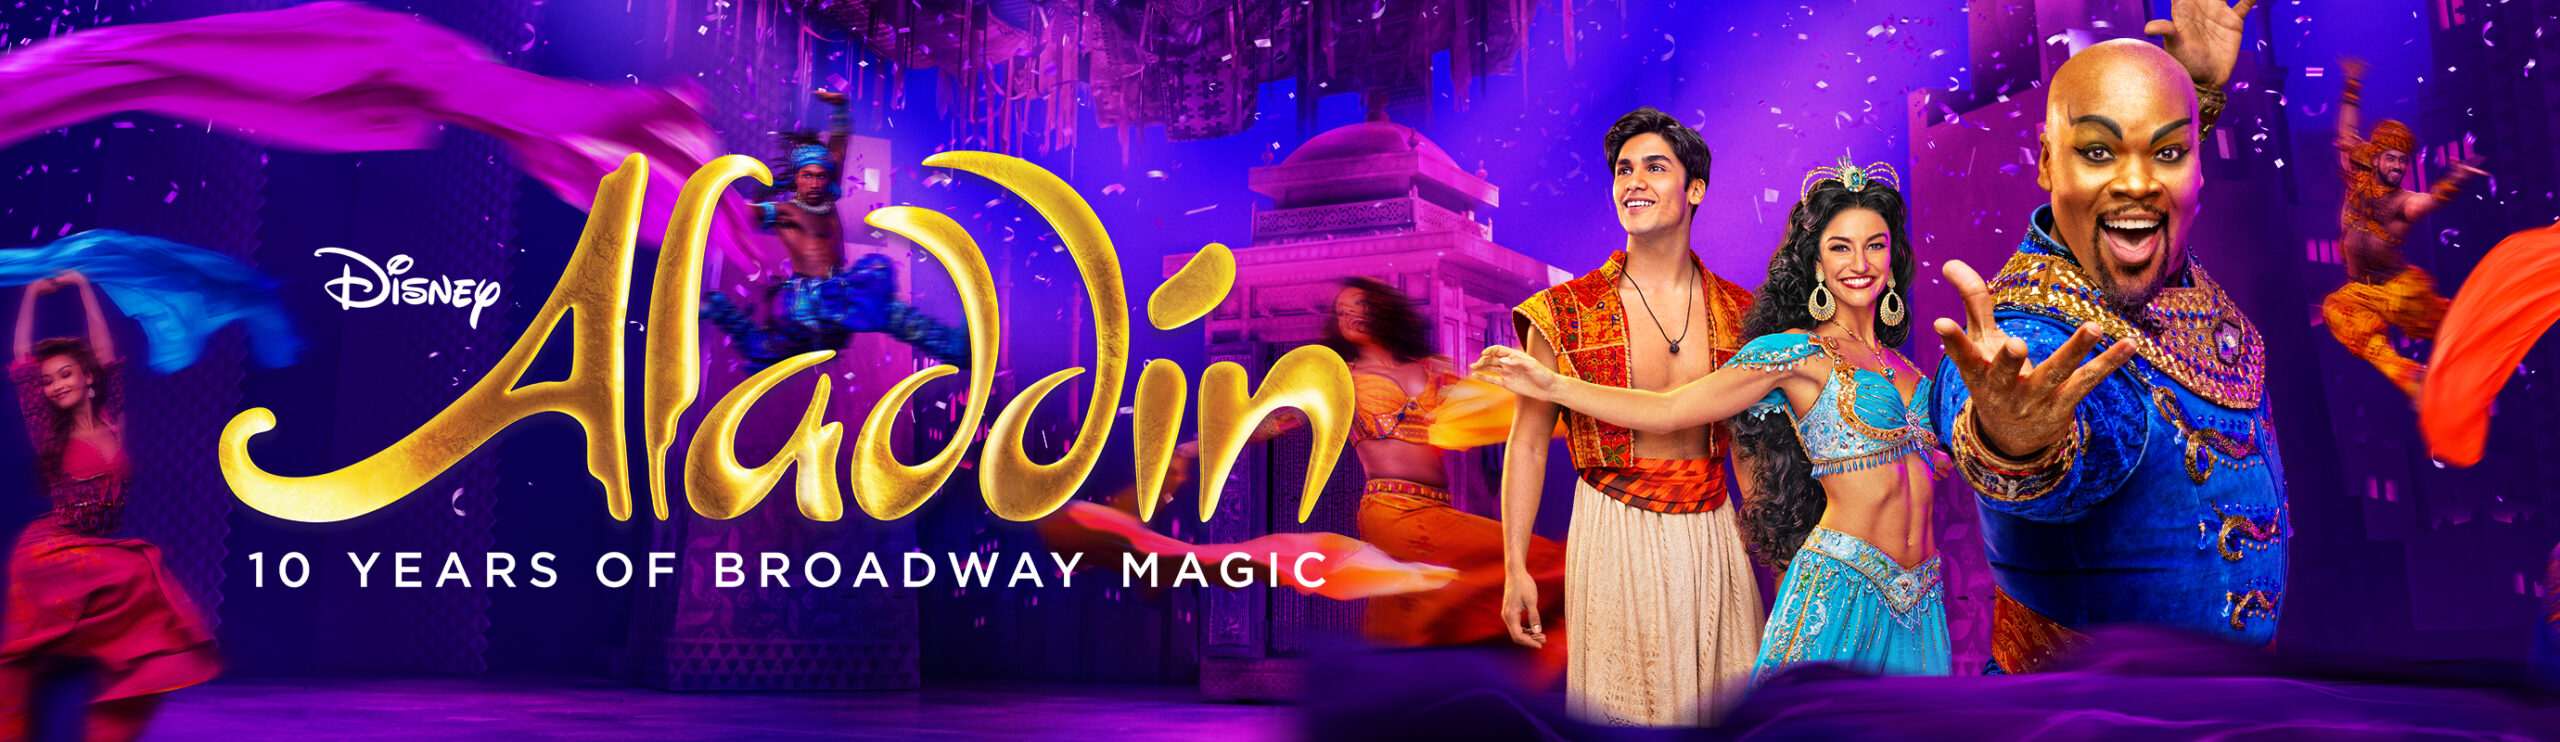 Aladdin 10 years of Broadway magic logo against a picture of the stage and jasmine, aladidn and the genie.